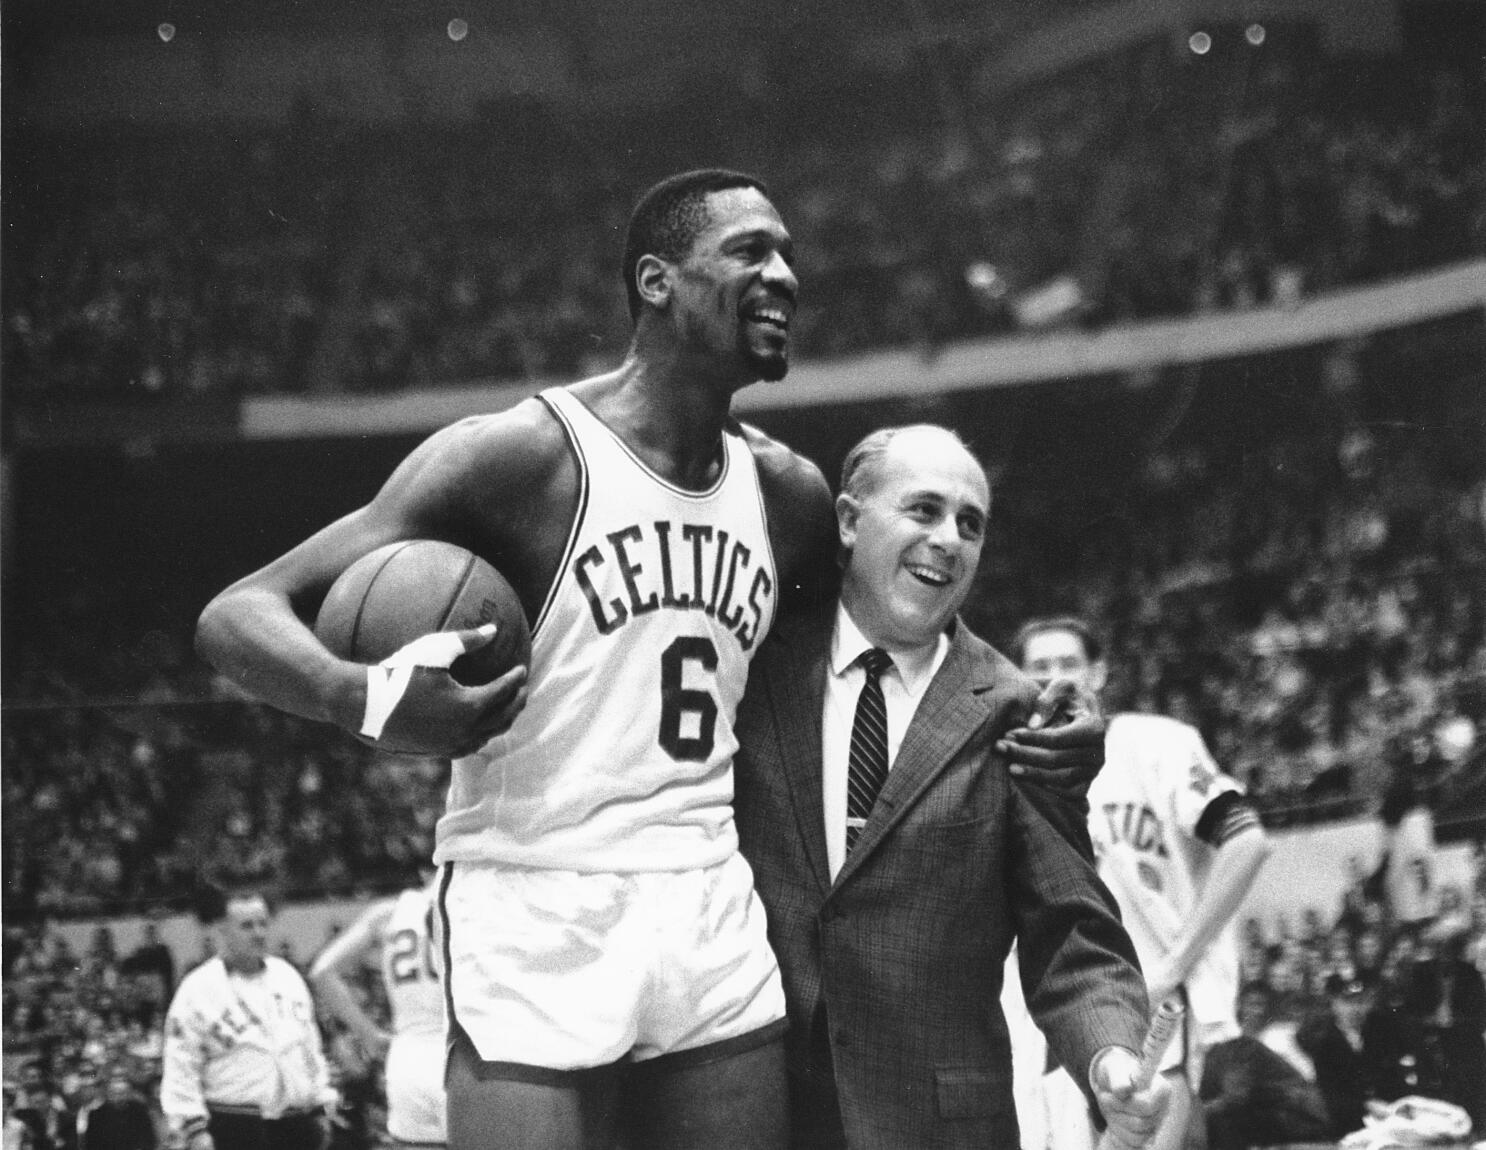 Celtics to debut beautiful jersey in honor of the late, great Bill